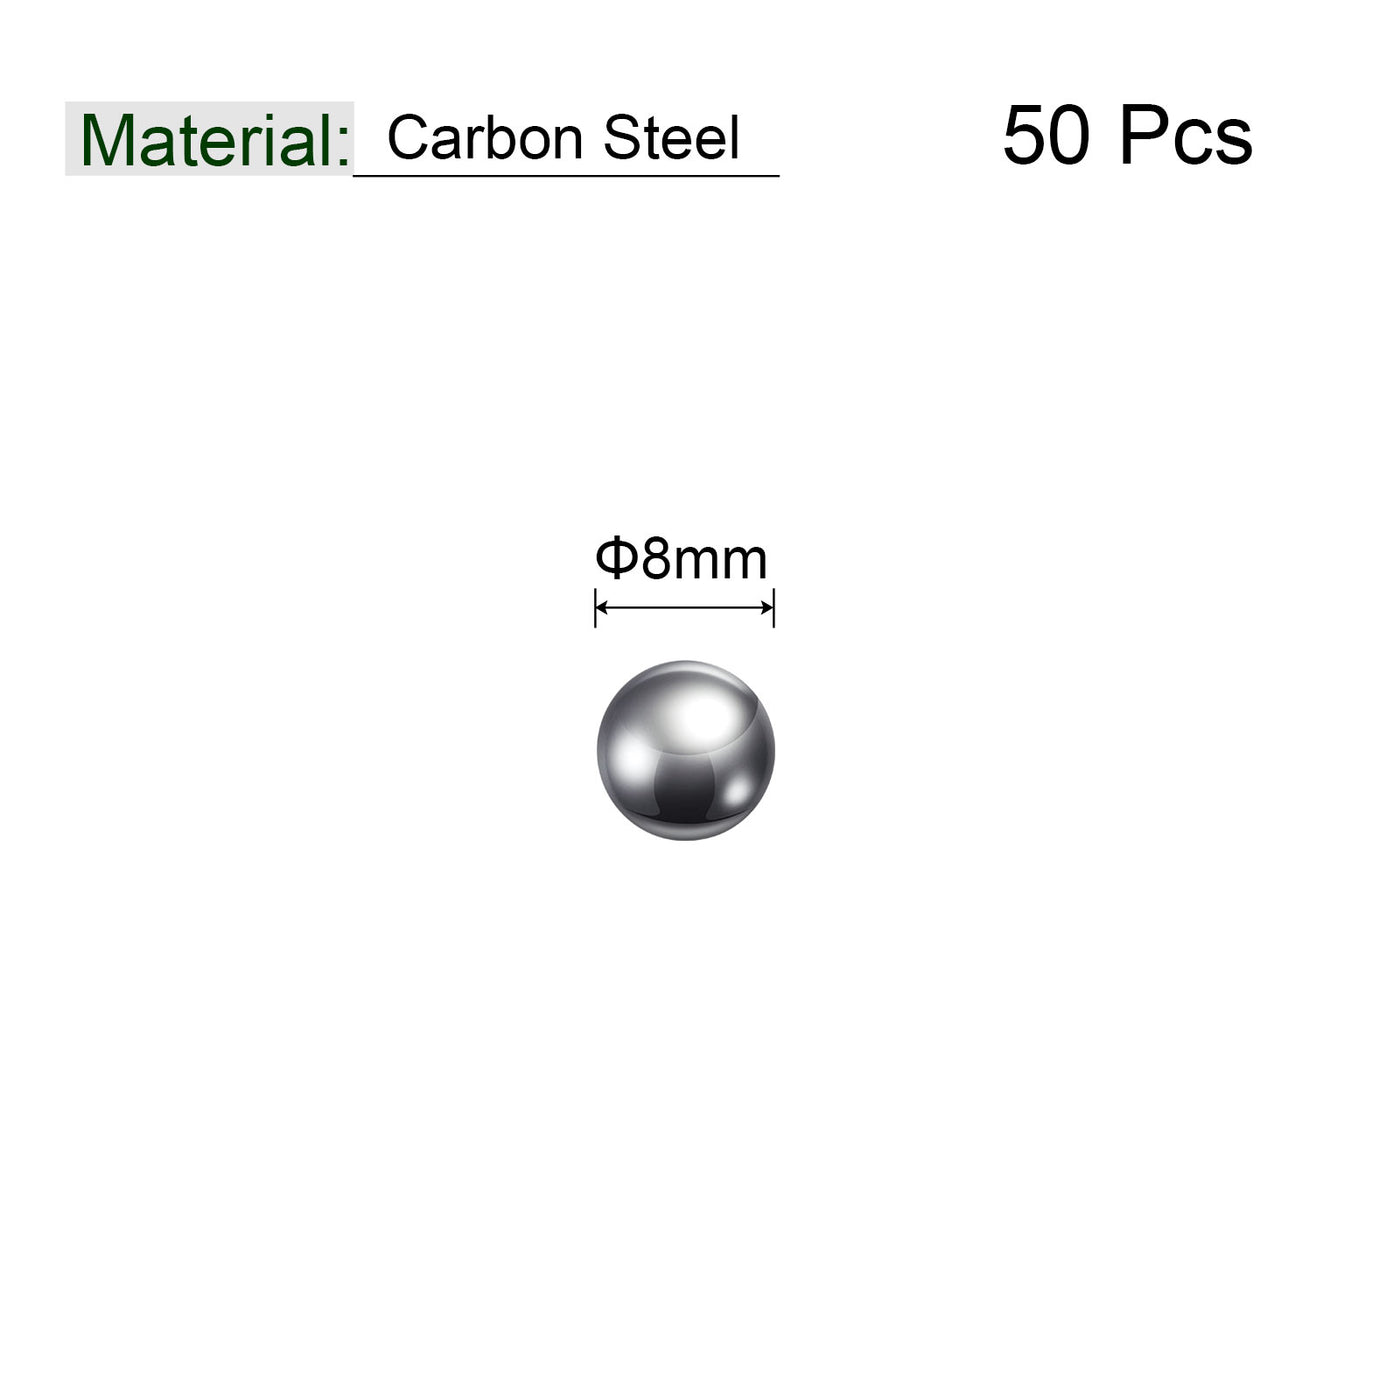 Uxcell Uxcell 10mm Carbon Steel Bearing Precision Balls for Bearings DIY Repair 500pcs